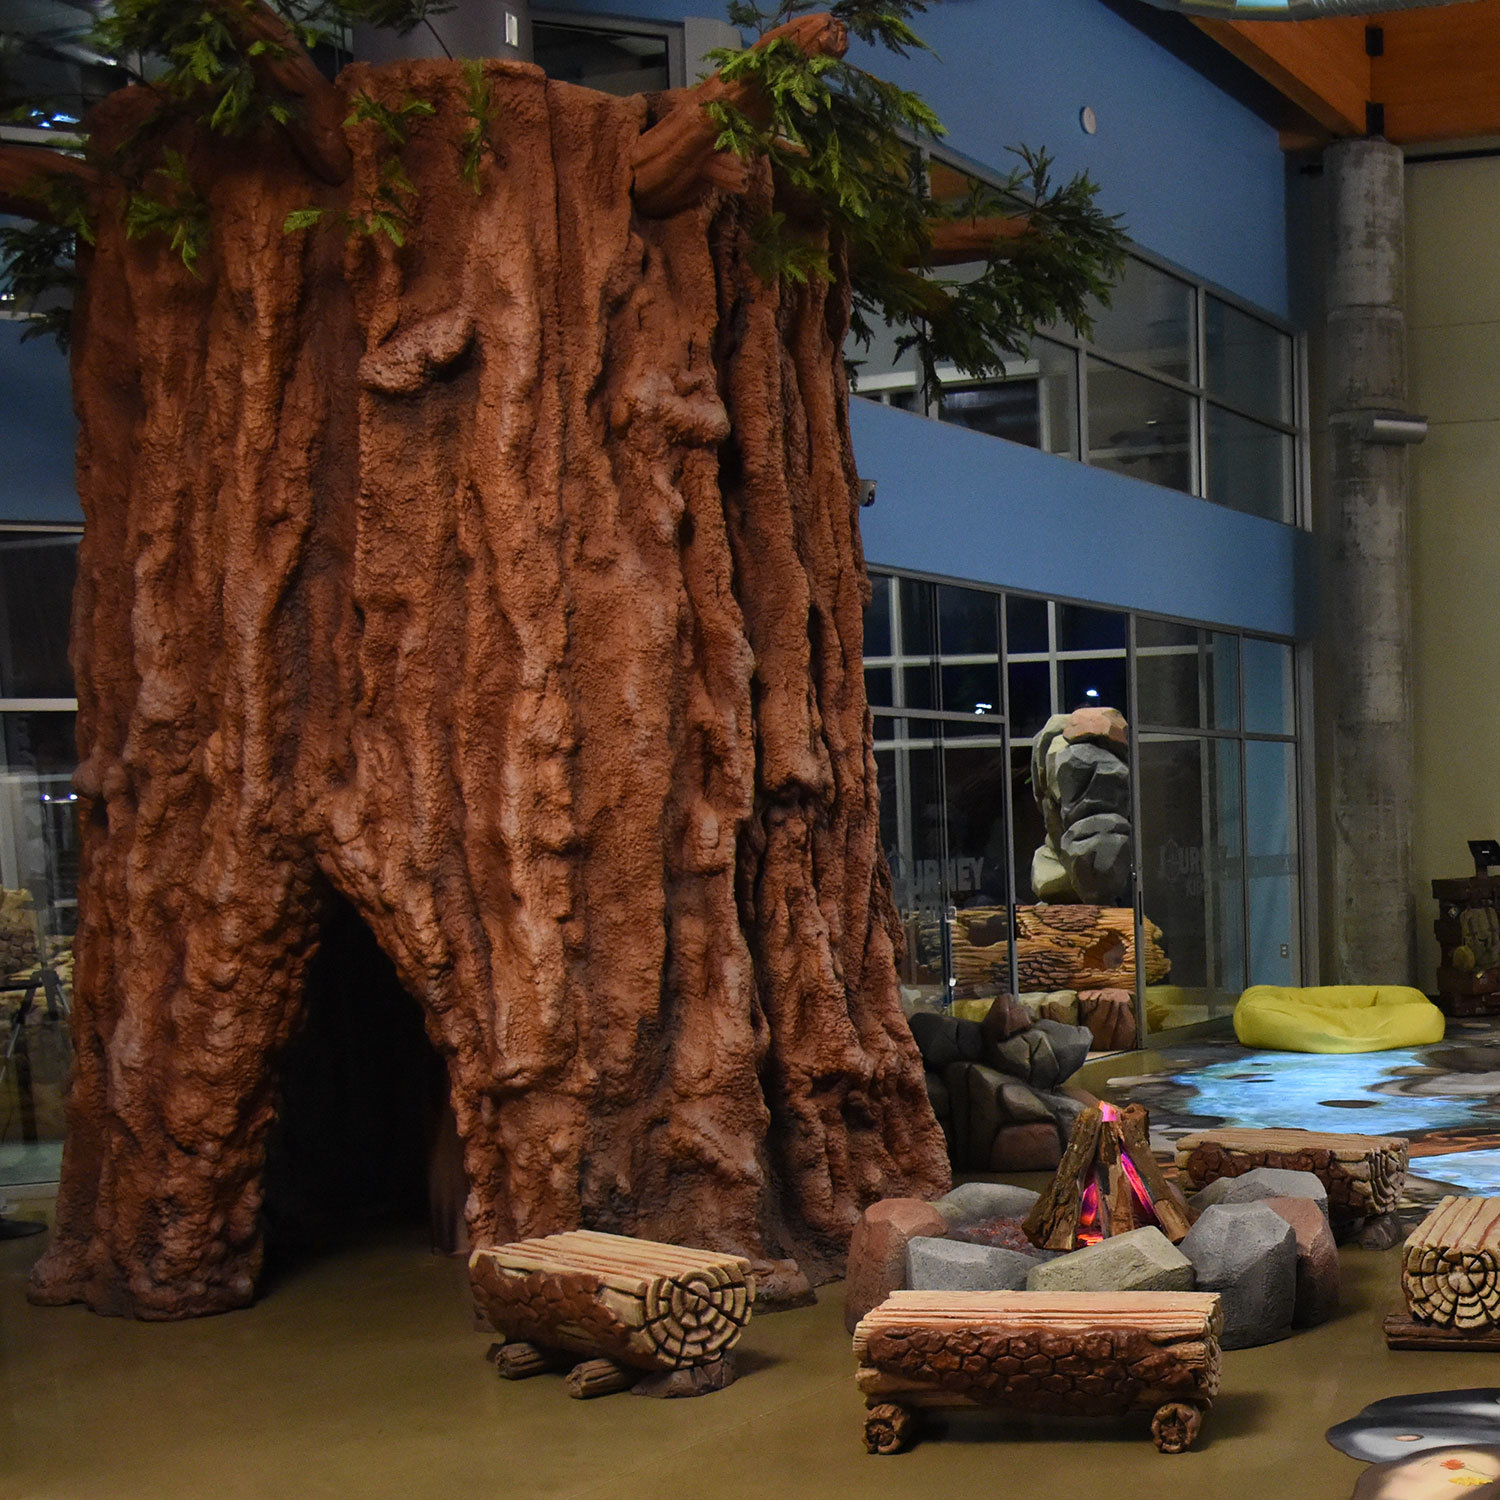 3D sculpted tree with crawl through, 3D fallen logs as benches, a fire pit, an animated stream and a yellow life raft in a Camping Themed Space at Abundant Life Church